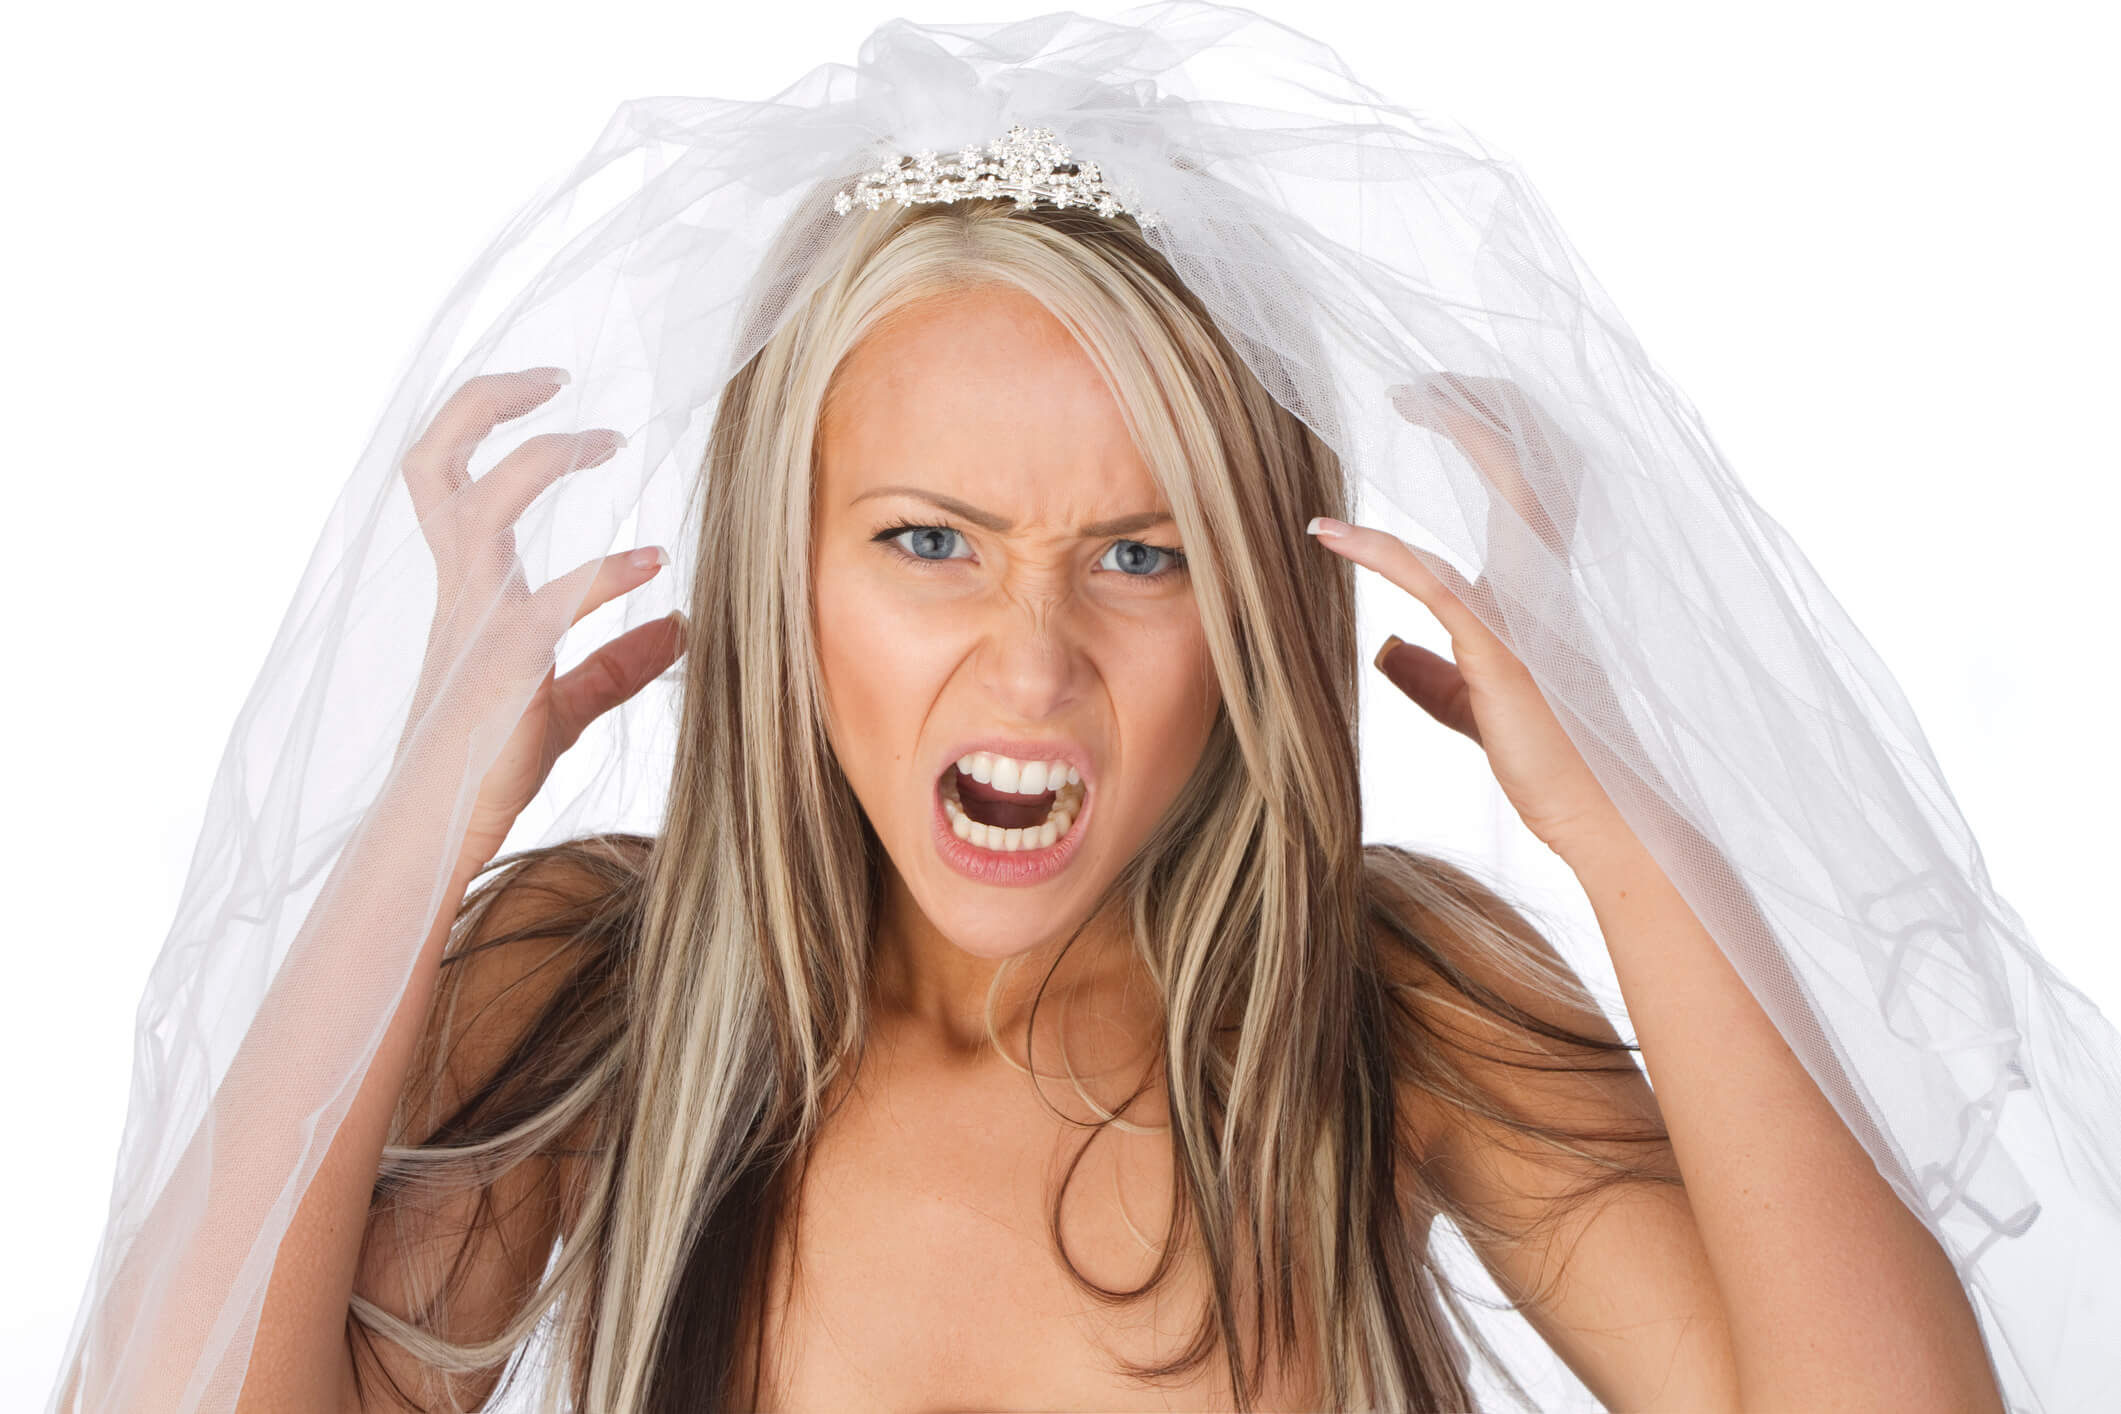 An angry woman in a wedding dress